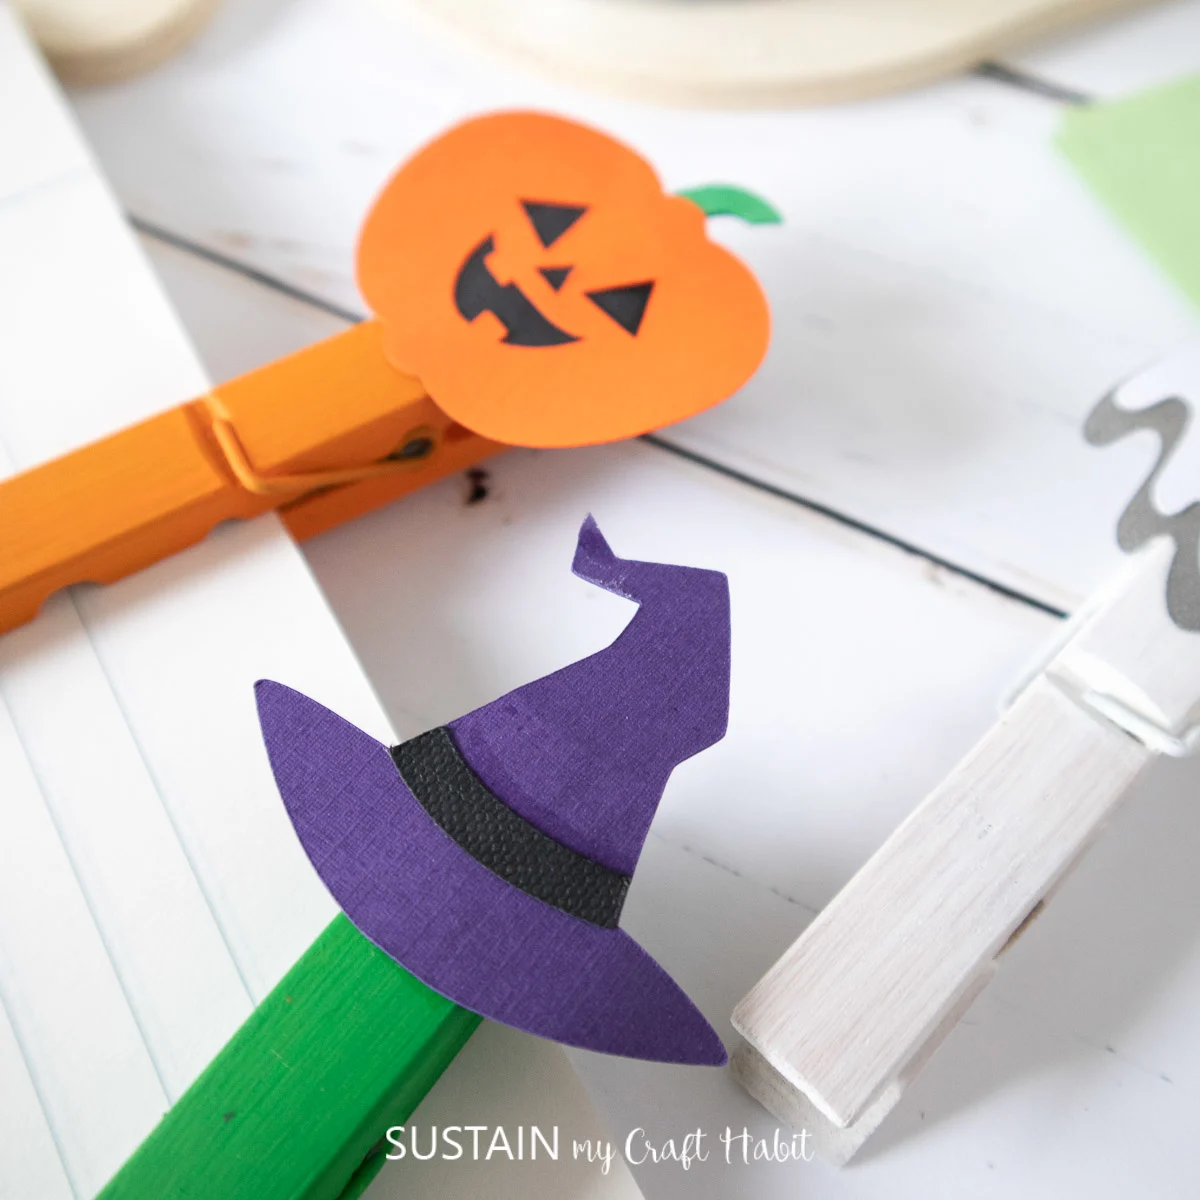 Completed pumpkin and witch's hat clothespin crafts being used to hold papers together.